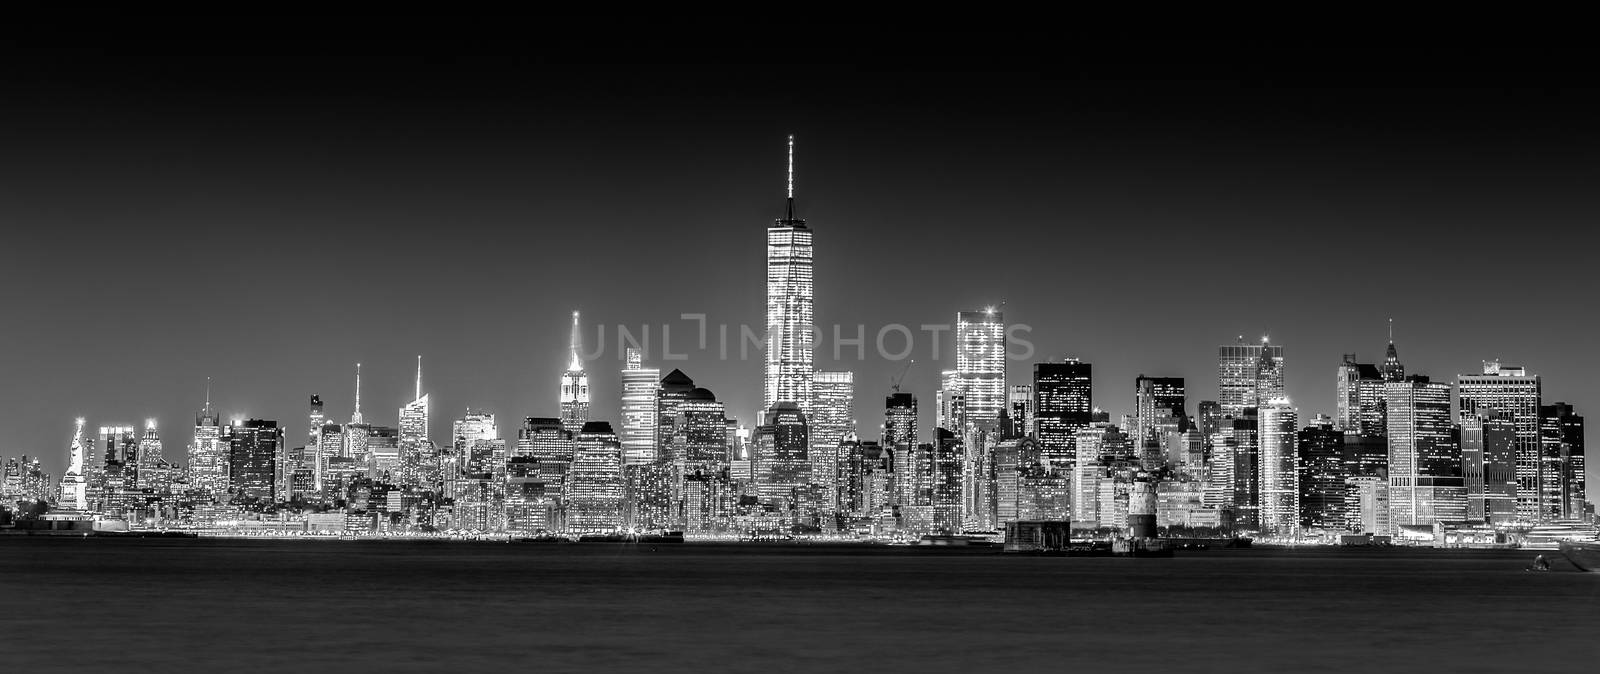 New York City Manhattan downtown skyline at dusk with skyscrapers illuminated over Hudson River panorama. Horizontal composition, copy space. Black and white image.